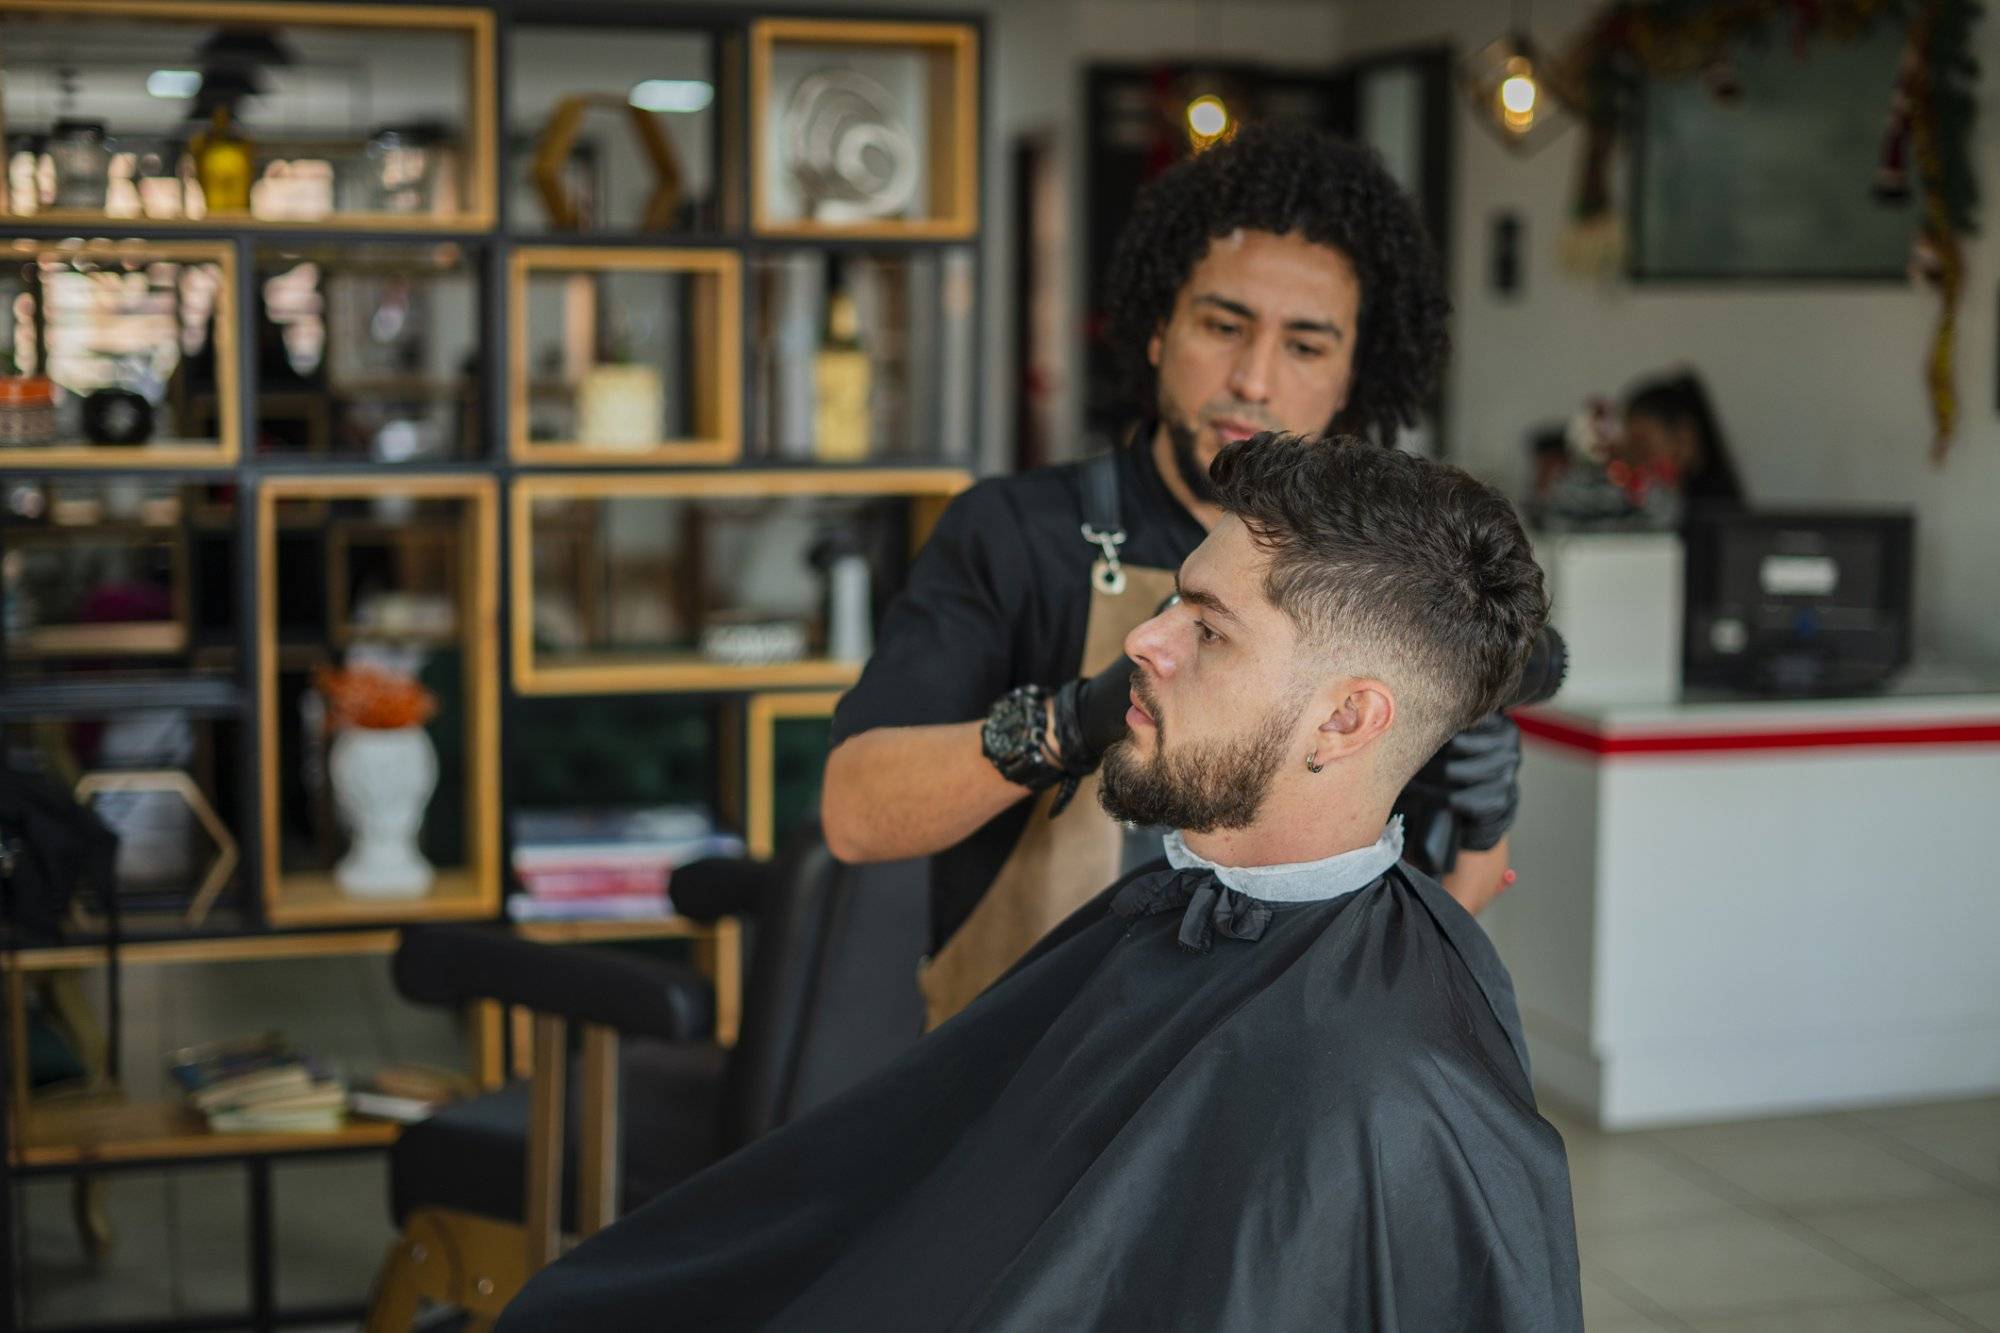 Enjoy Classic Cuts for All at Family Barber Shop in Arlington